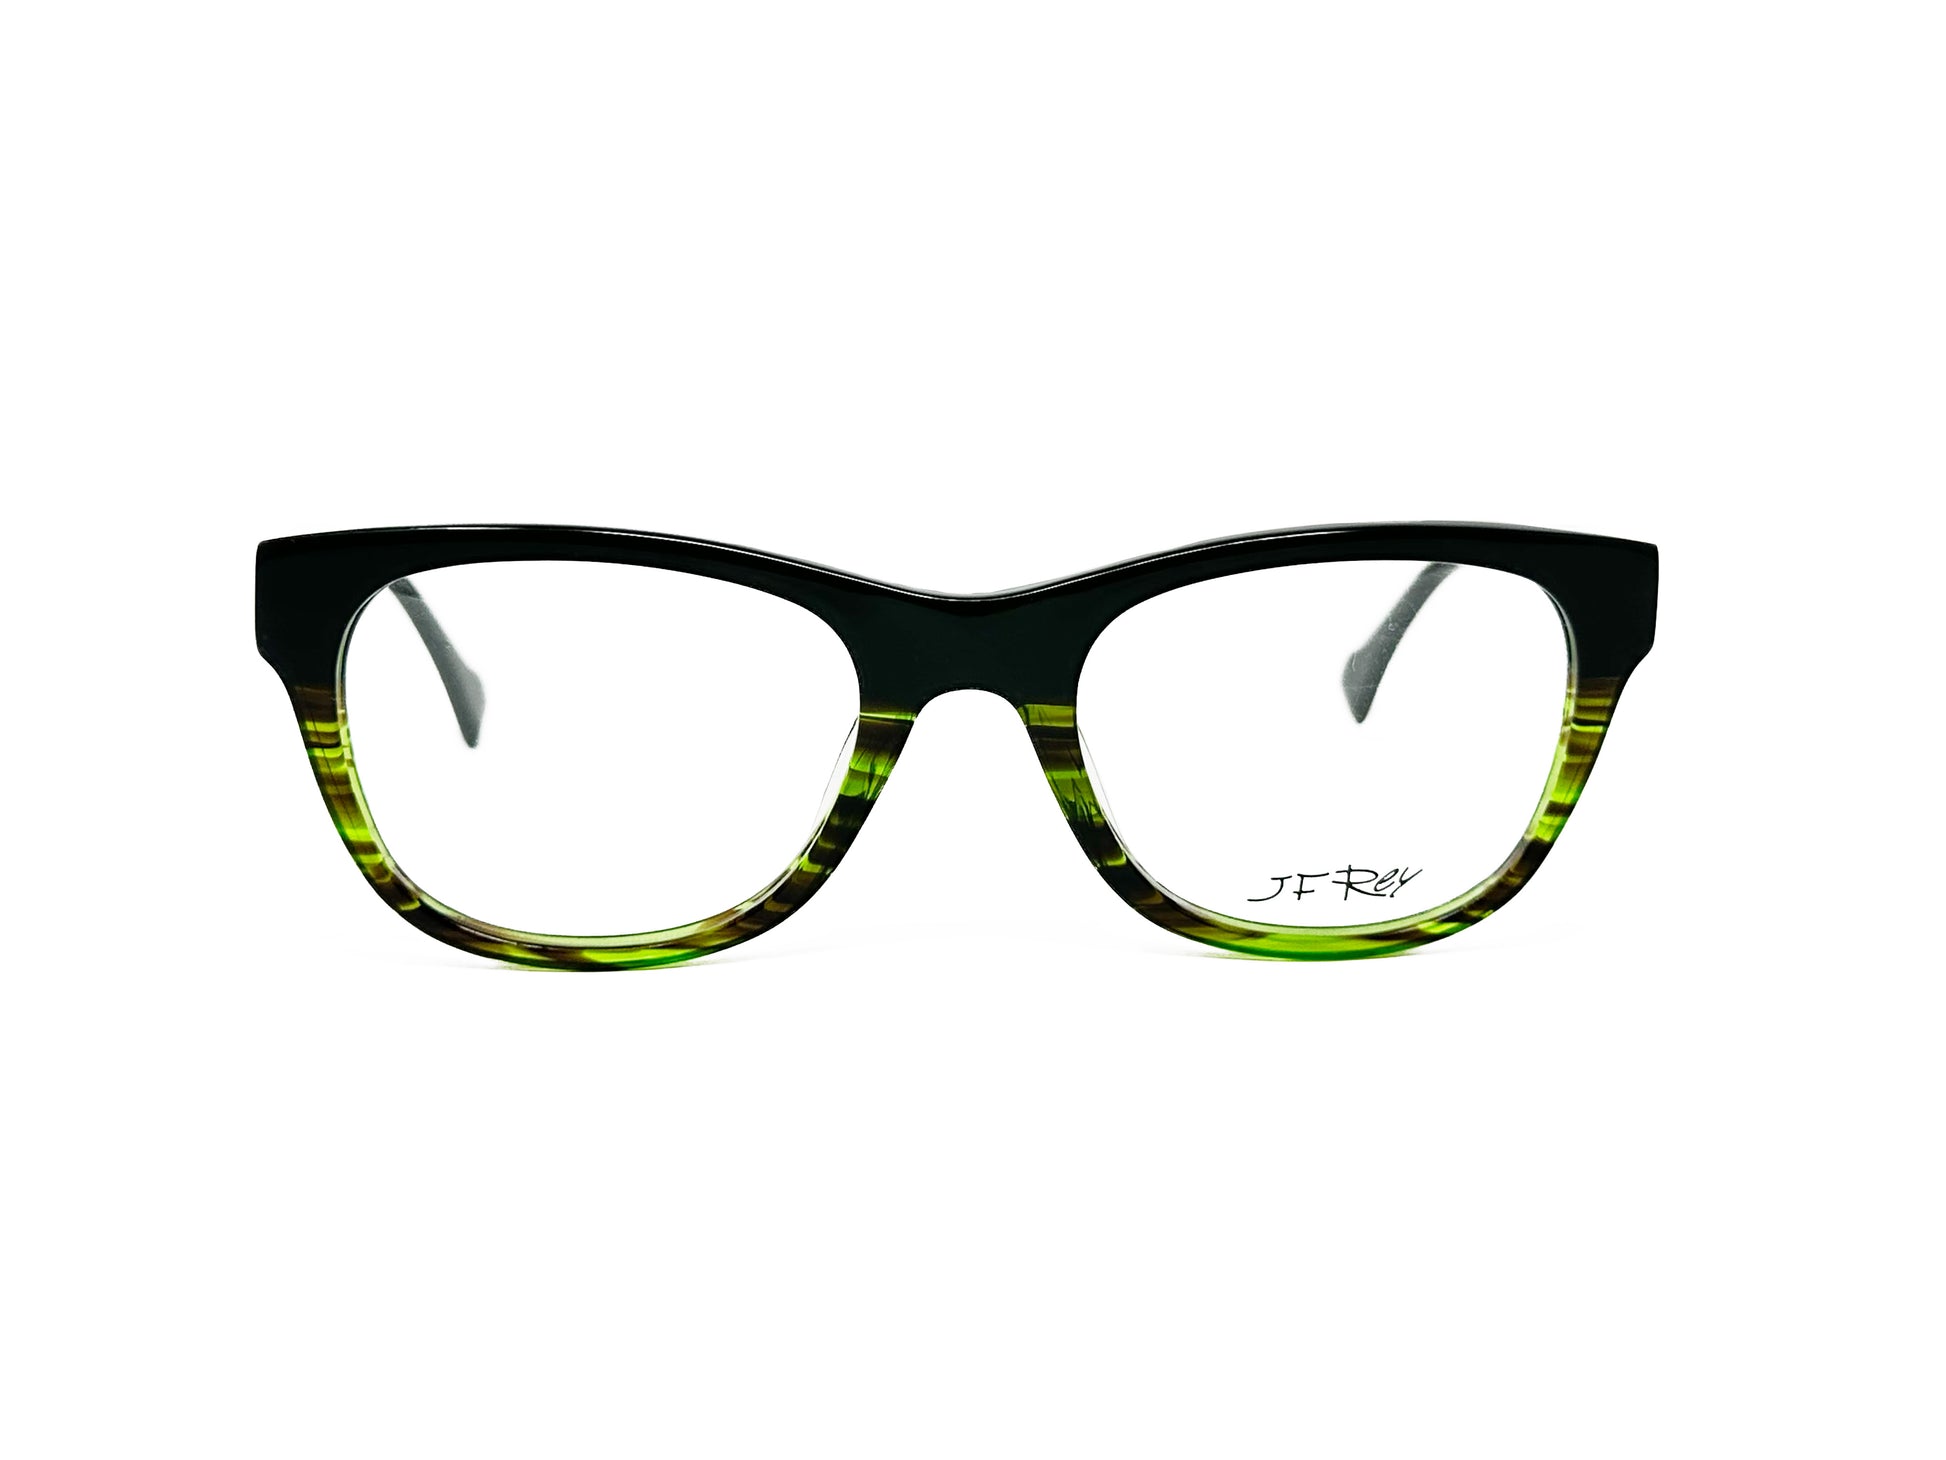 JF Rey rounded-square, acetate, optical frame. Model: JF1297. Color: 0040 - Black with semi-transparent lime green stripes on bottom of frame. Front view. 